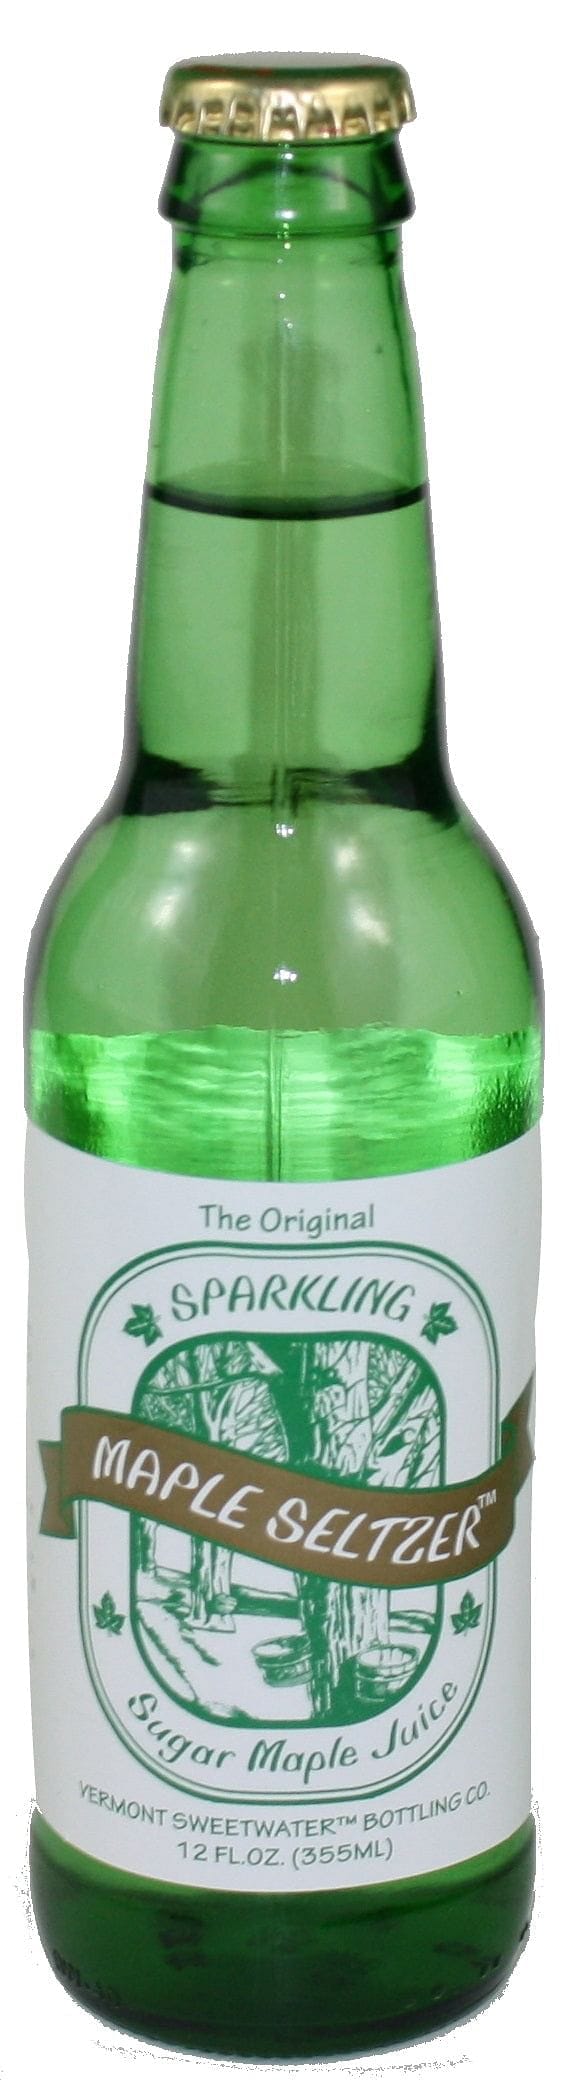 Vermont Sweetwater All Natural Glass Bottle Soda (Sparkling Maple Seltzer) - Shelburne Country Store